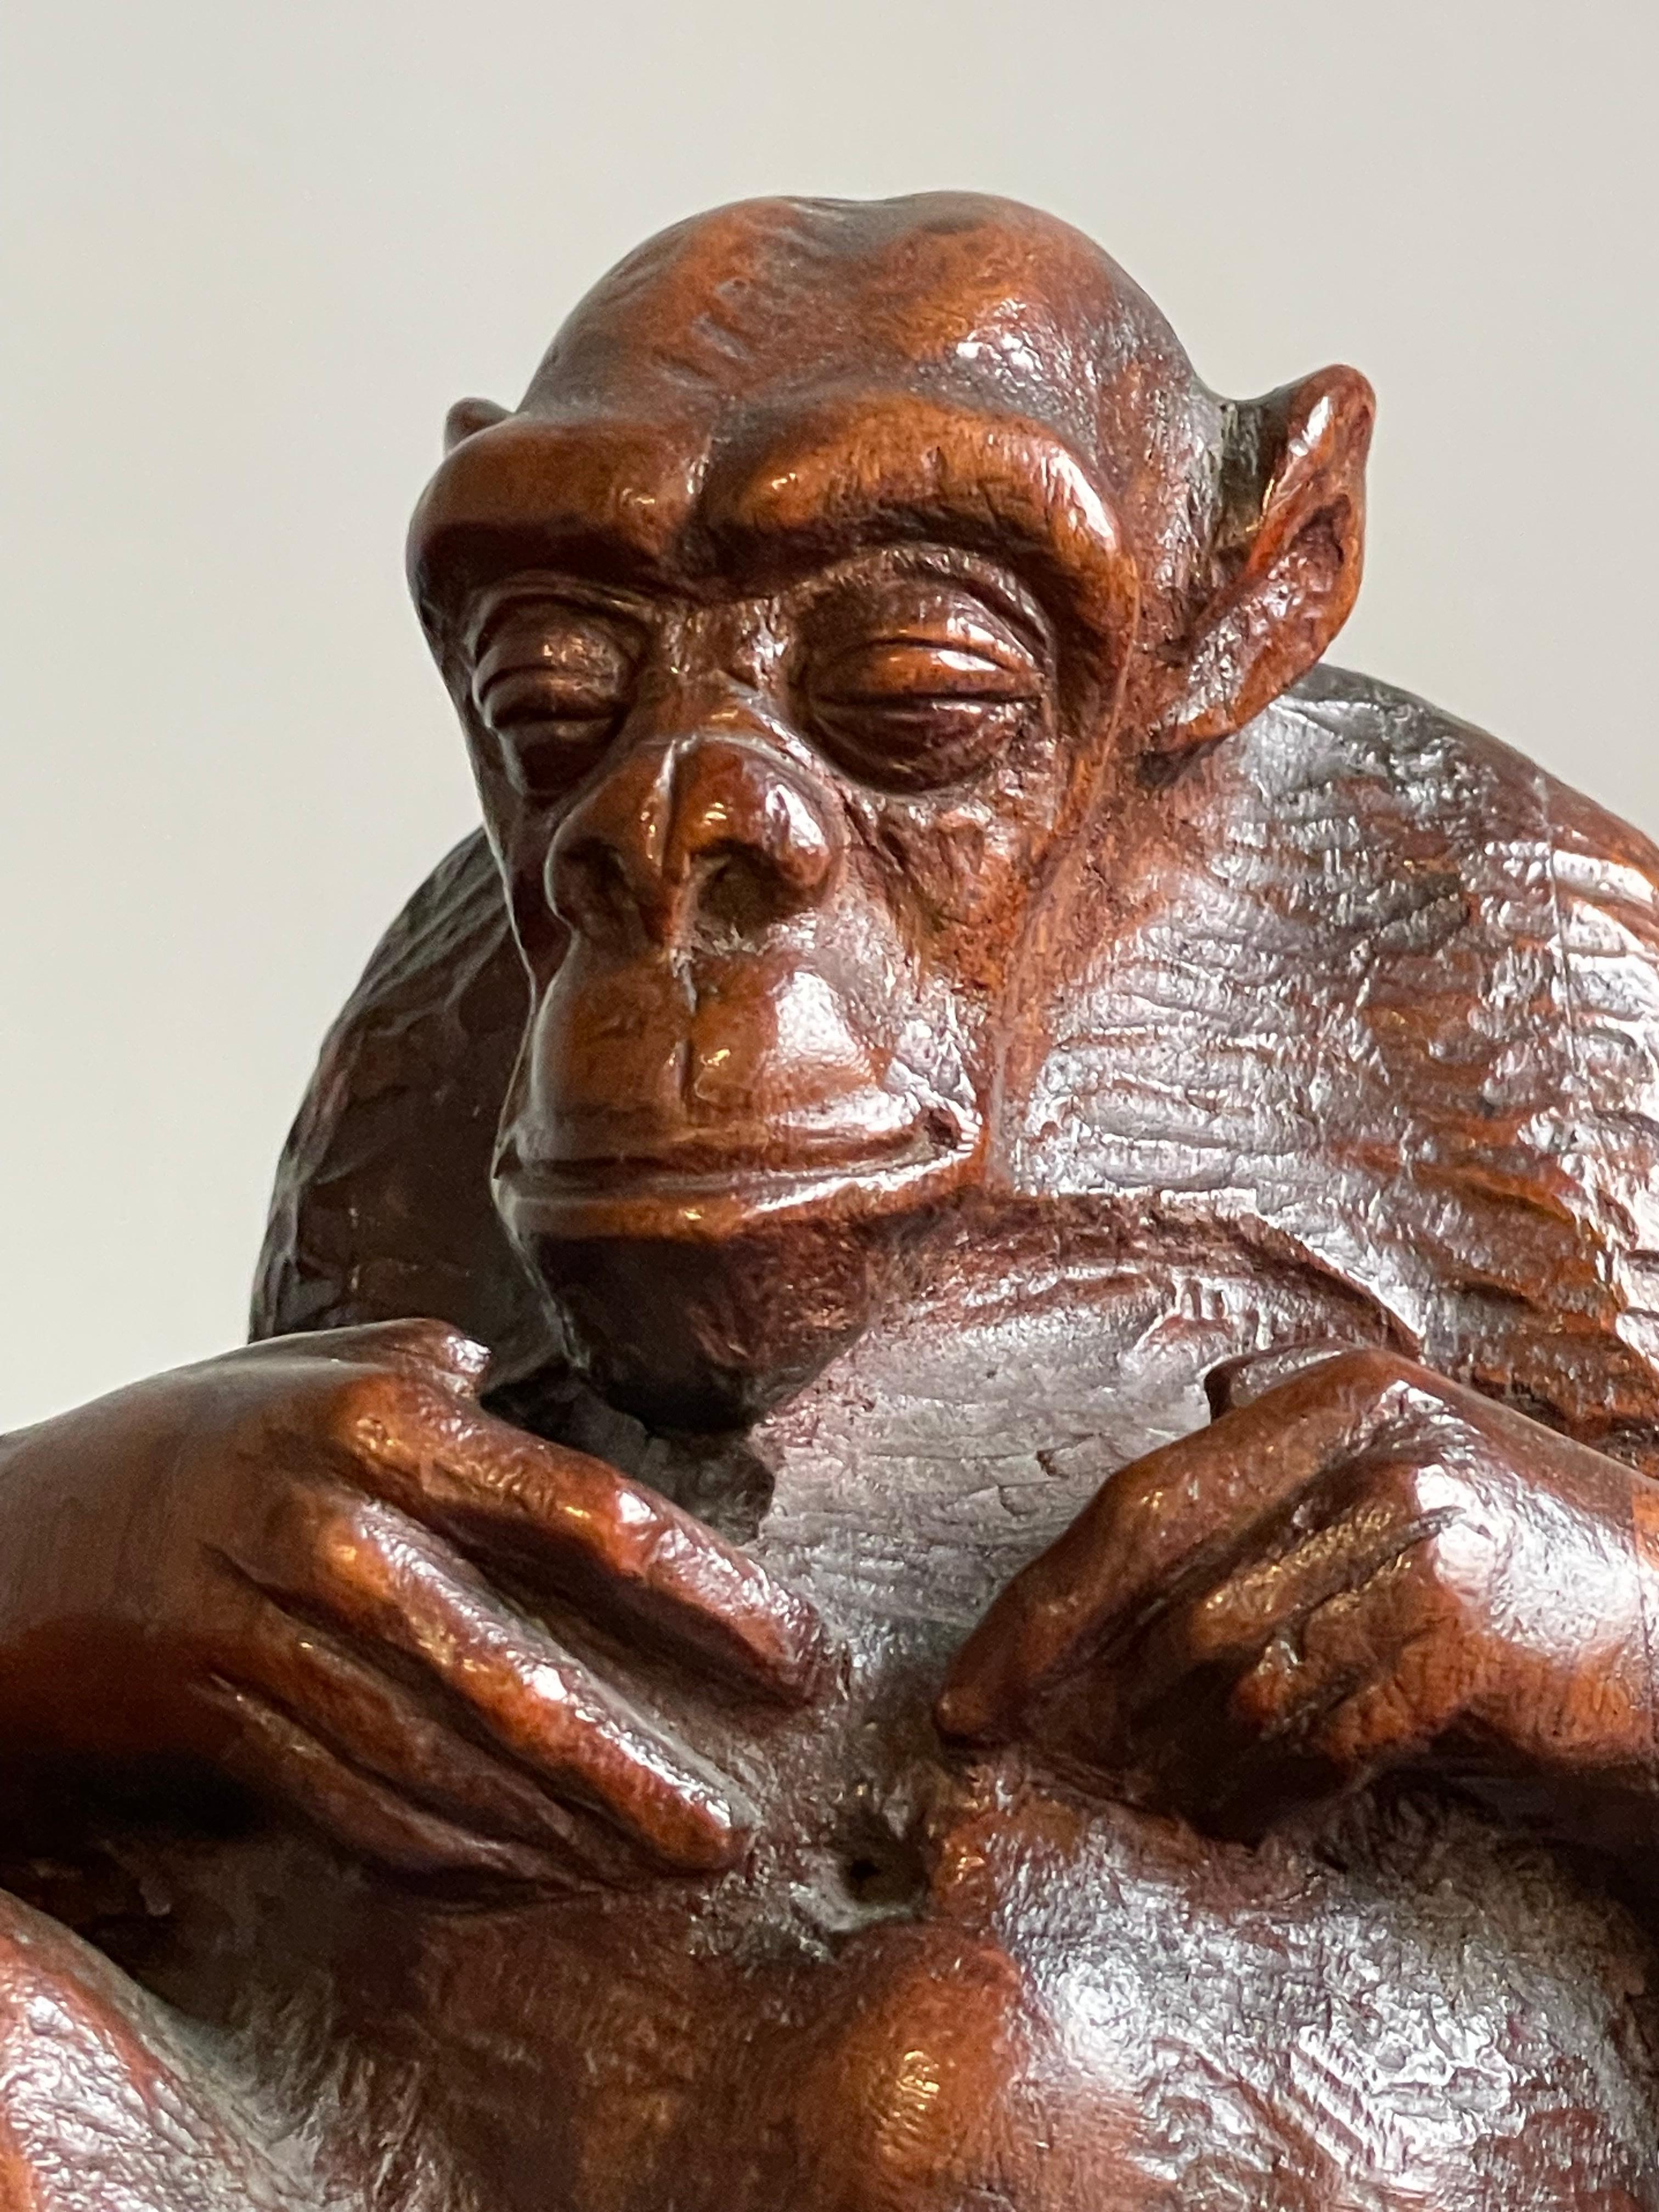 This marvelous and meaningful antique chimp is beautiful for many reasons.

This rare and delightful chimpanzee sculpture puts a smile on everybodies face, but he also is impressive because of the quality of the carving and meaningful too. The